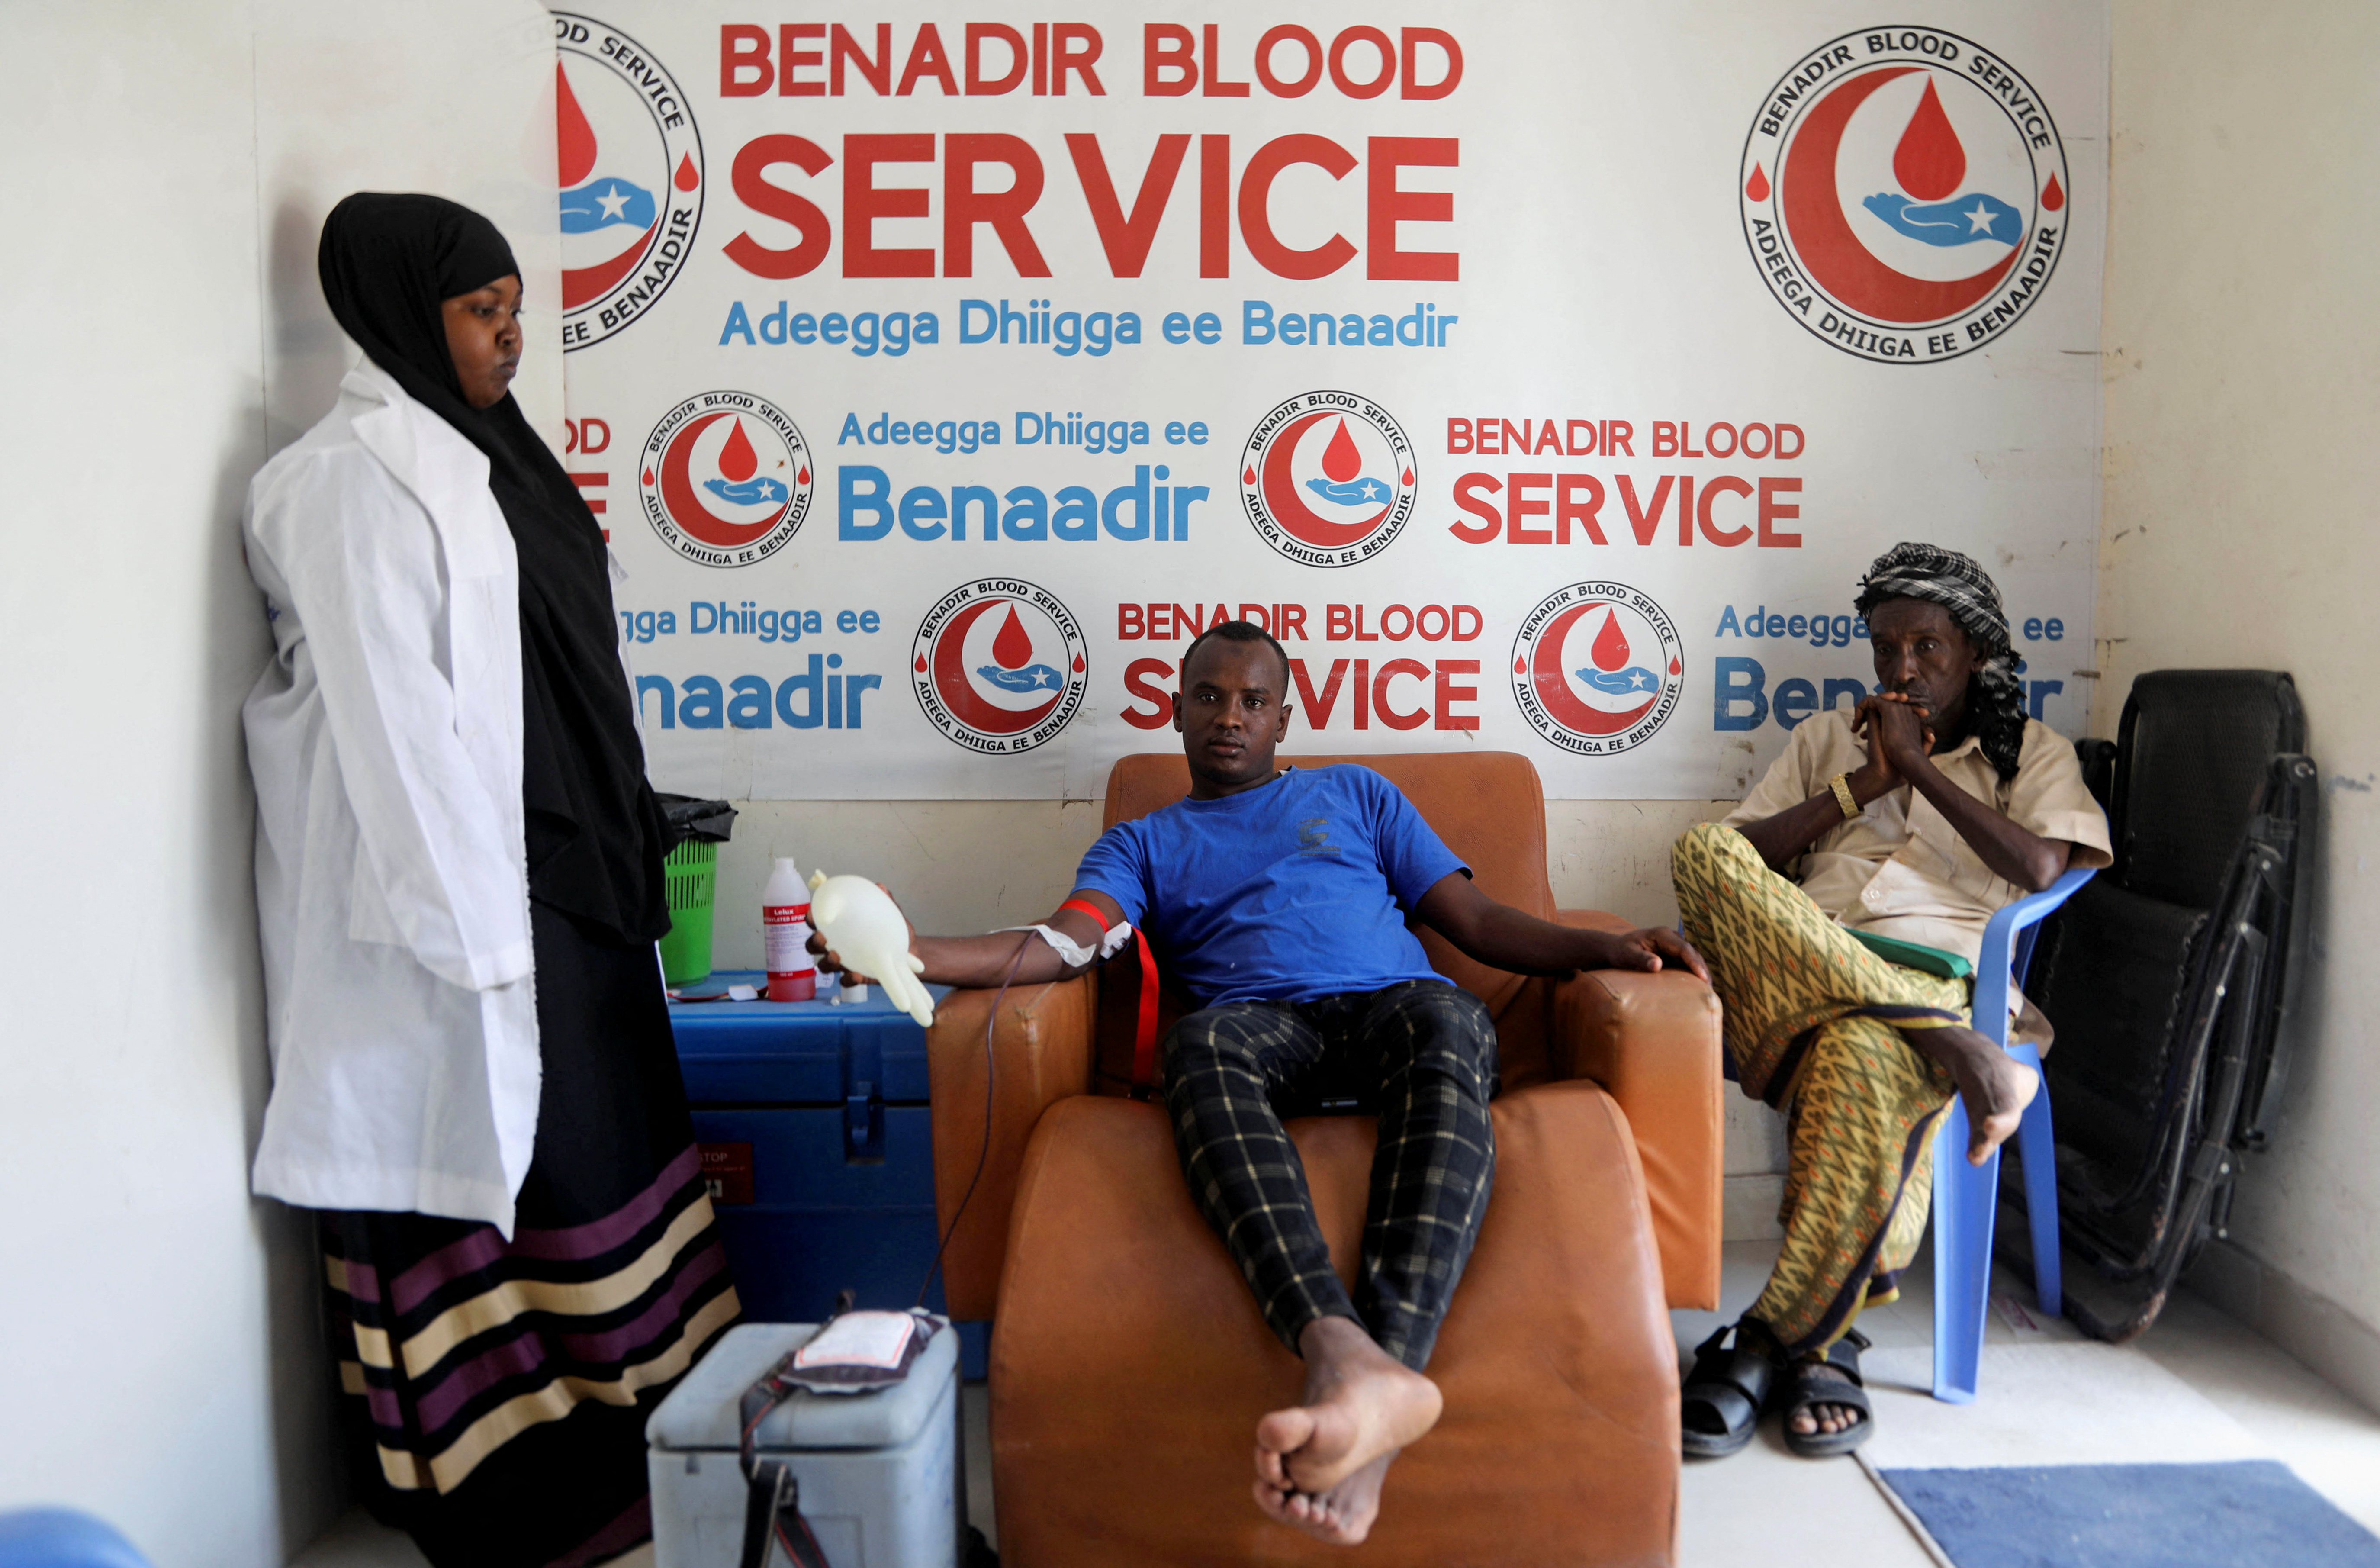 Somali doctors band together to build the nation's only blood bank, in Mogadishu